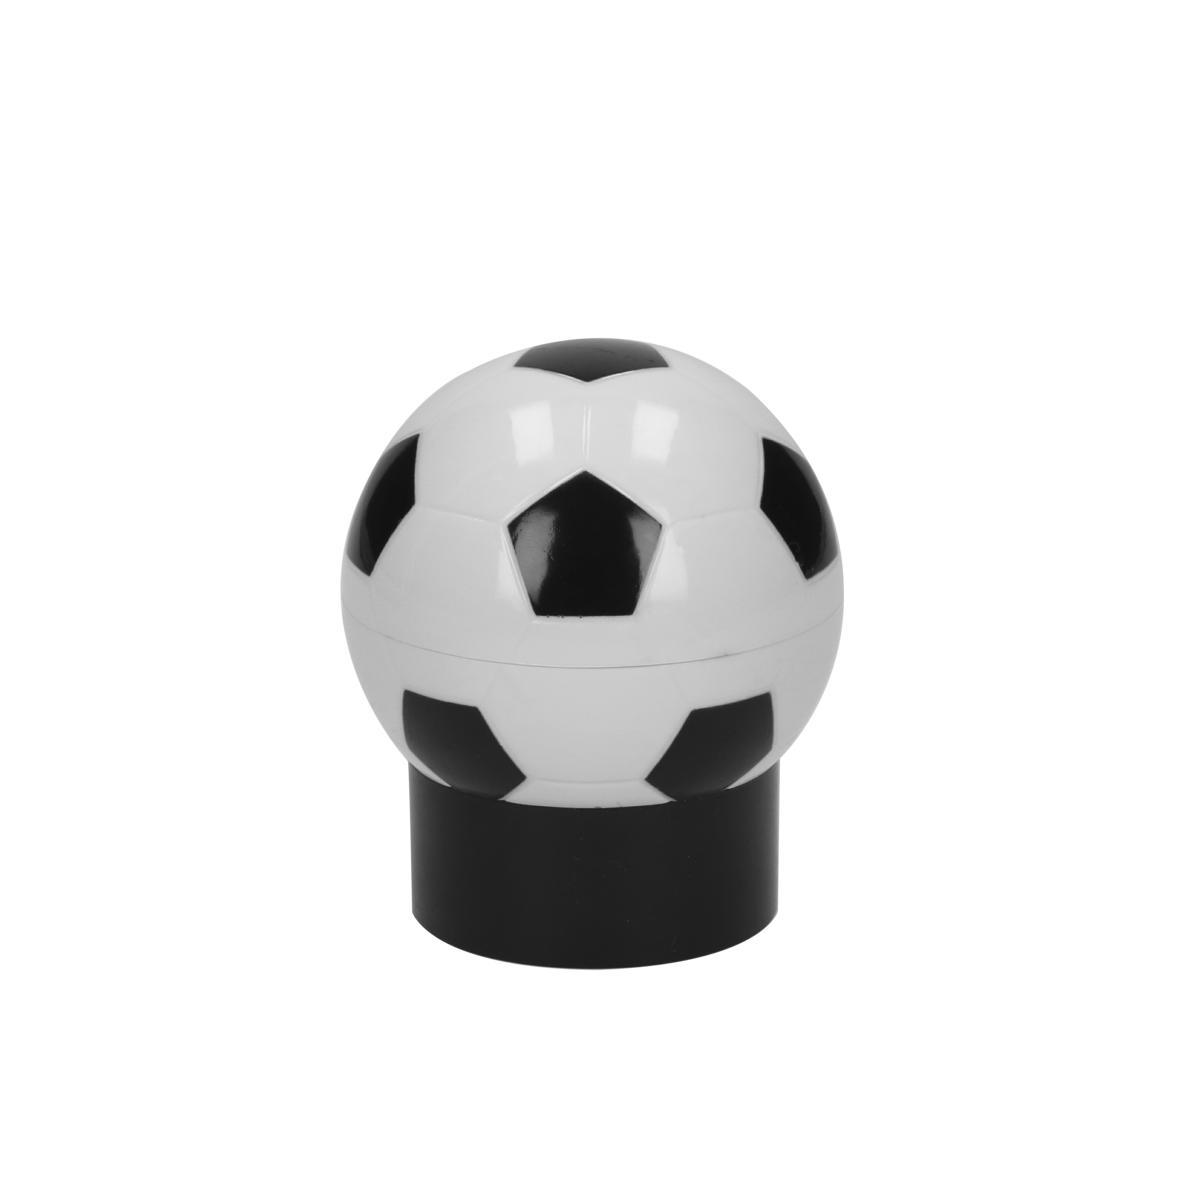 A bottle opener shaped like a football that has a push-up function - Skegness